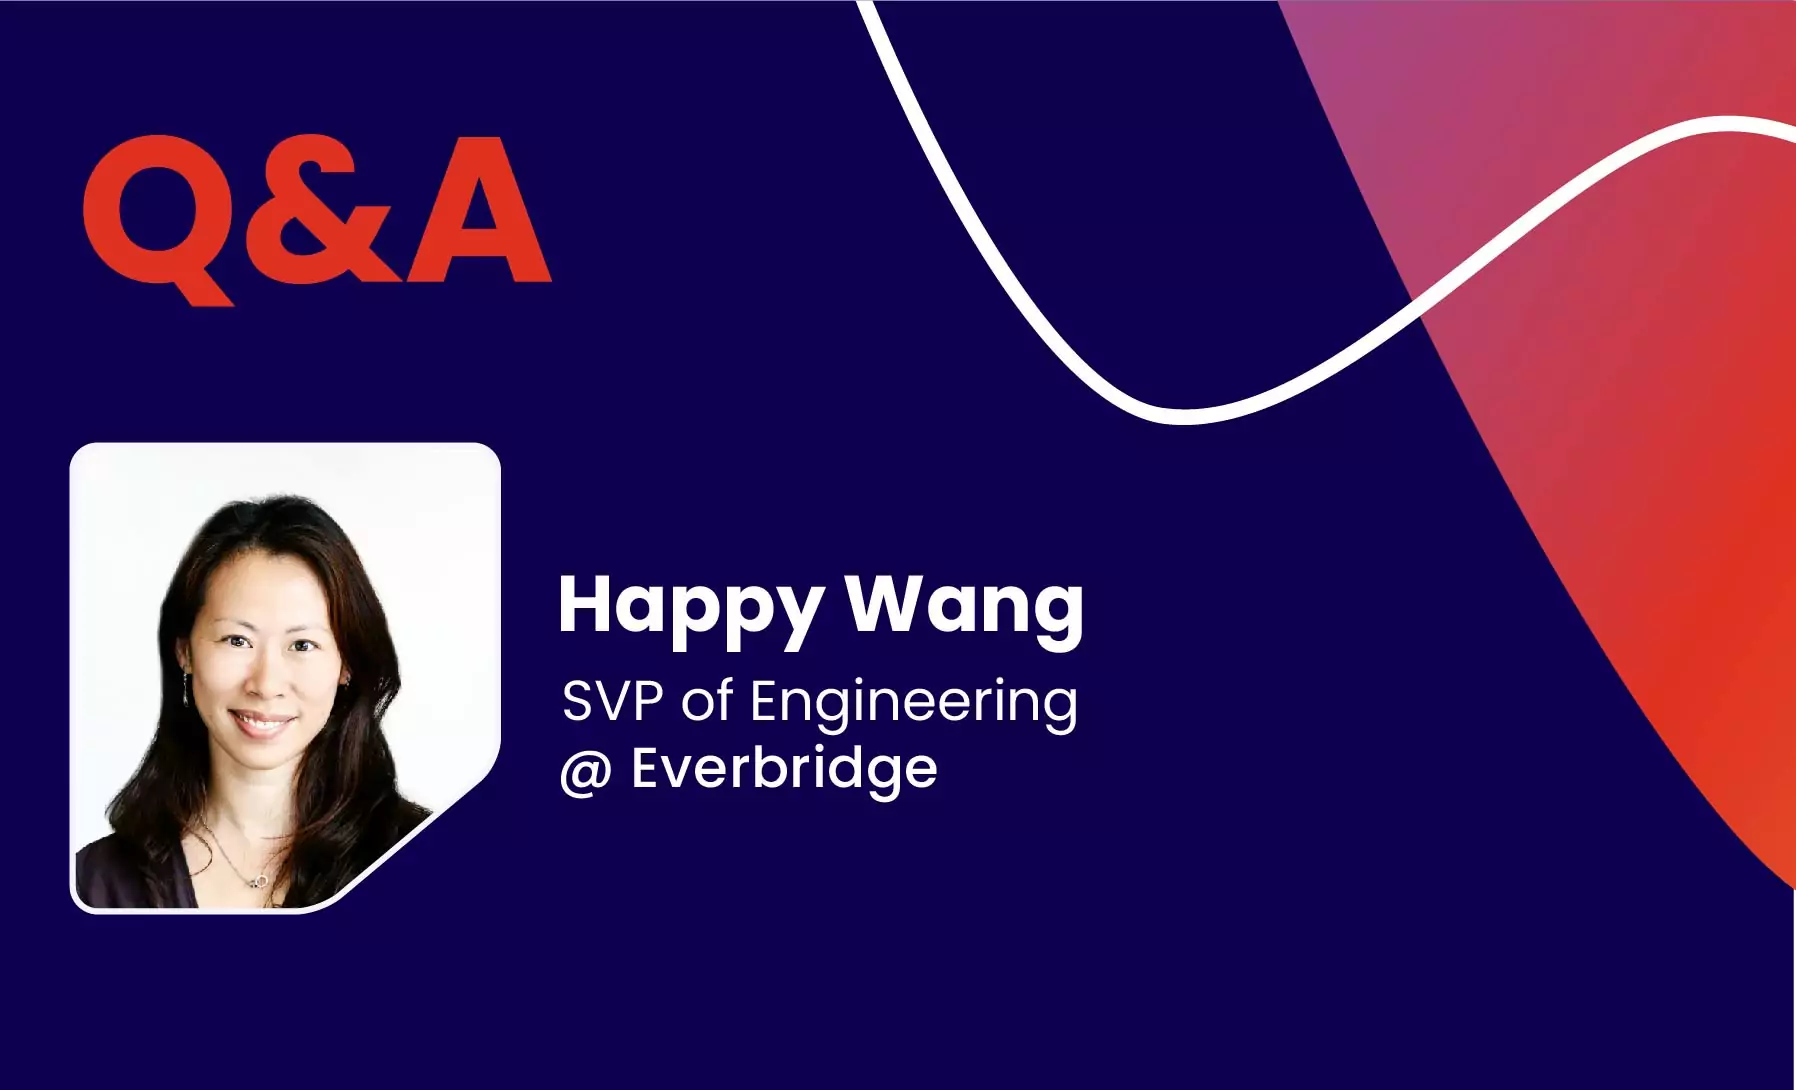 Q&A with Happy Wang, SVP of Engineering @ Everbridge